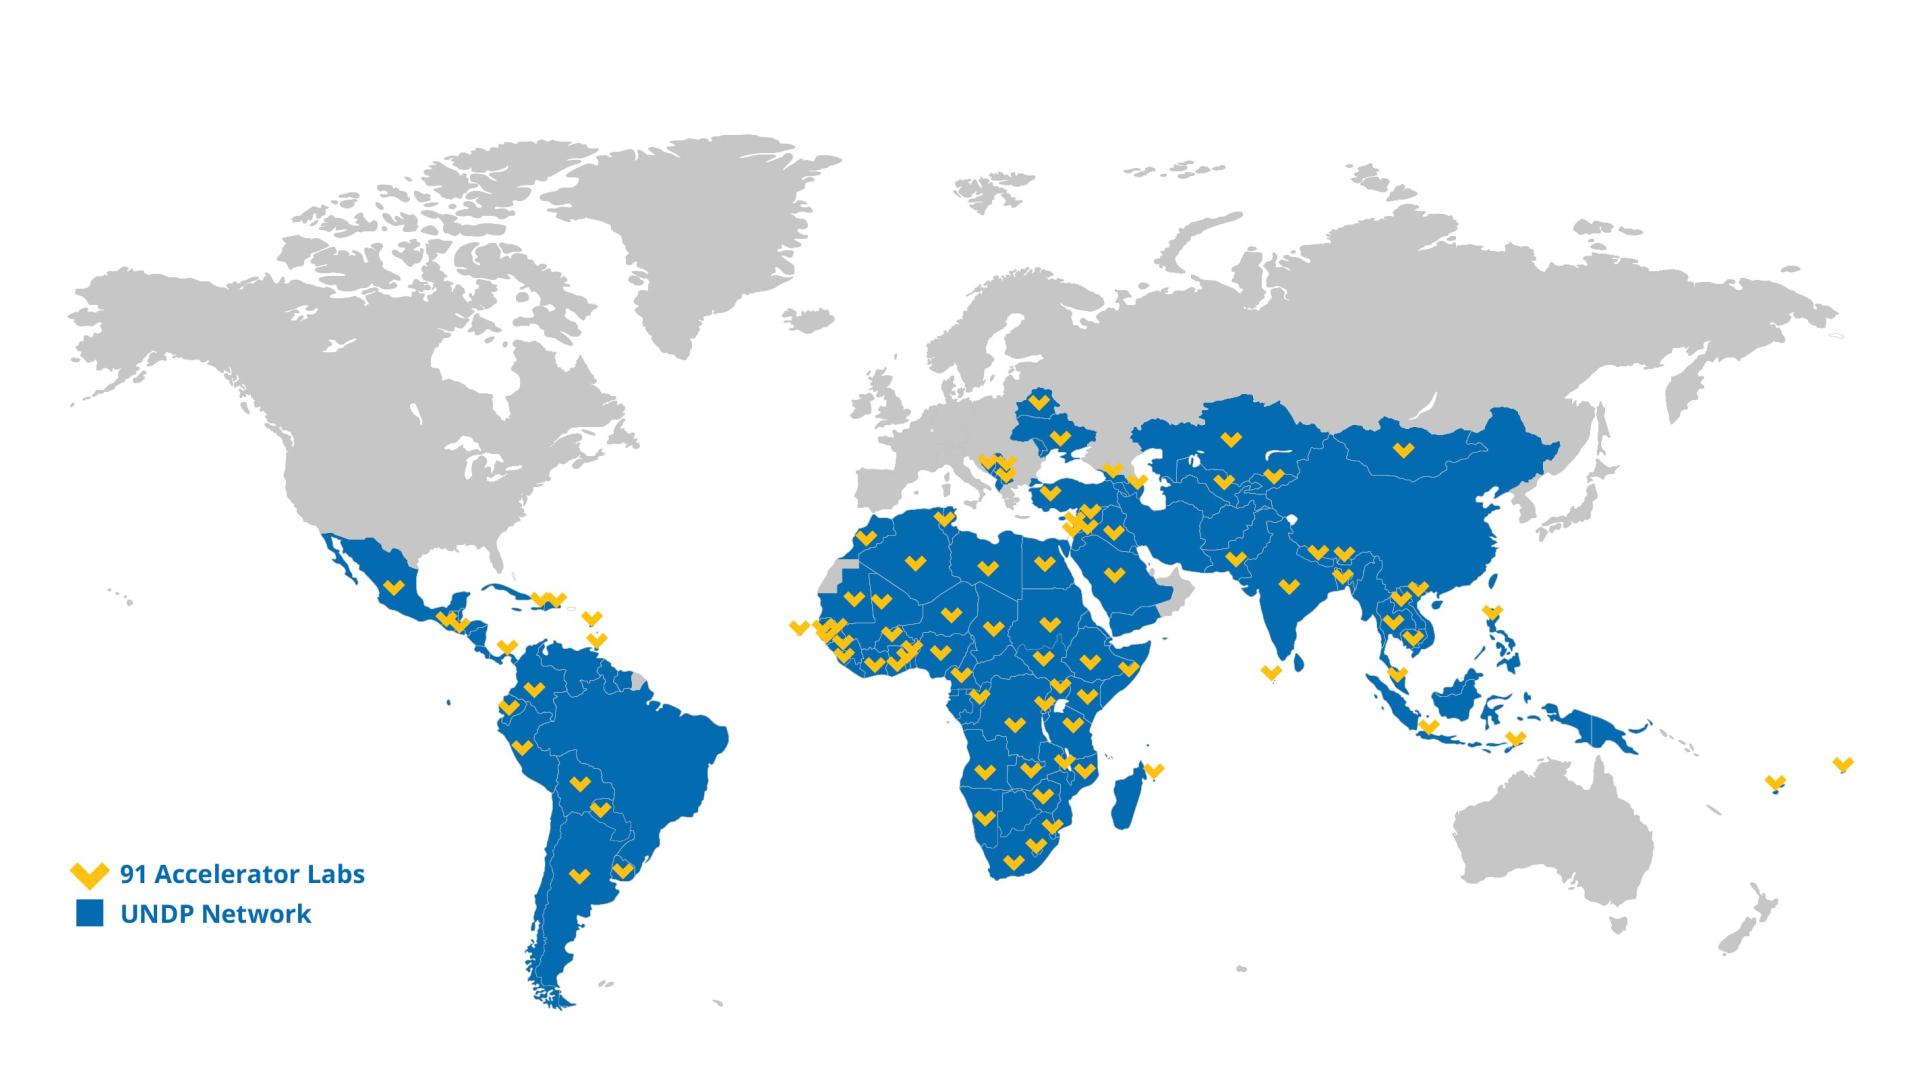 world map with pins where the Accelerator Labs are located, mostly in the Global South